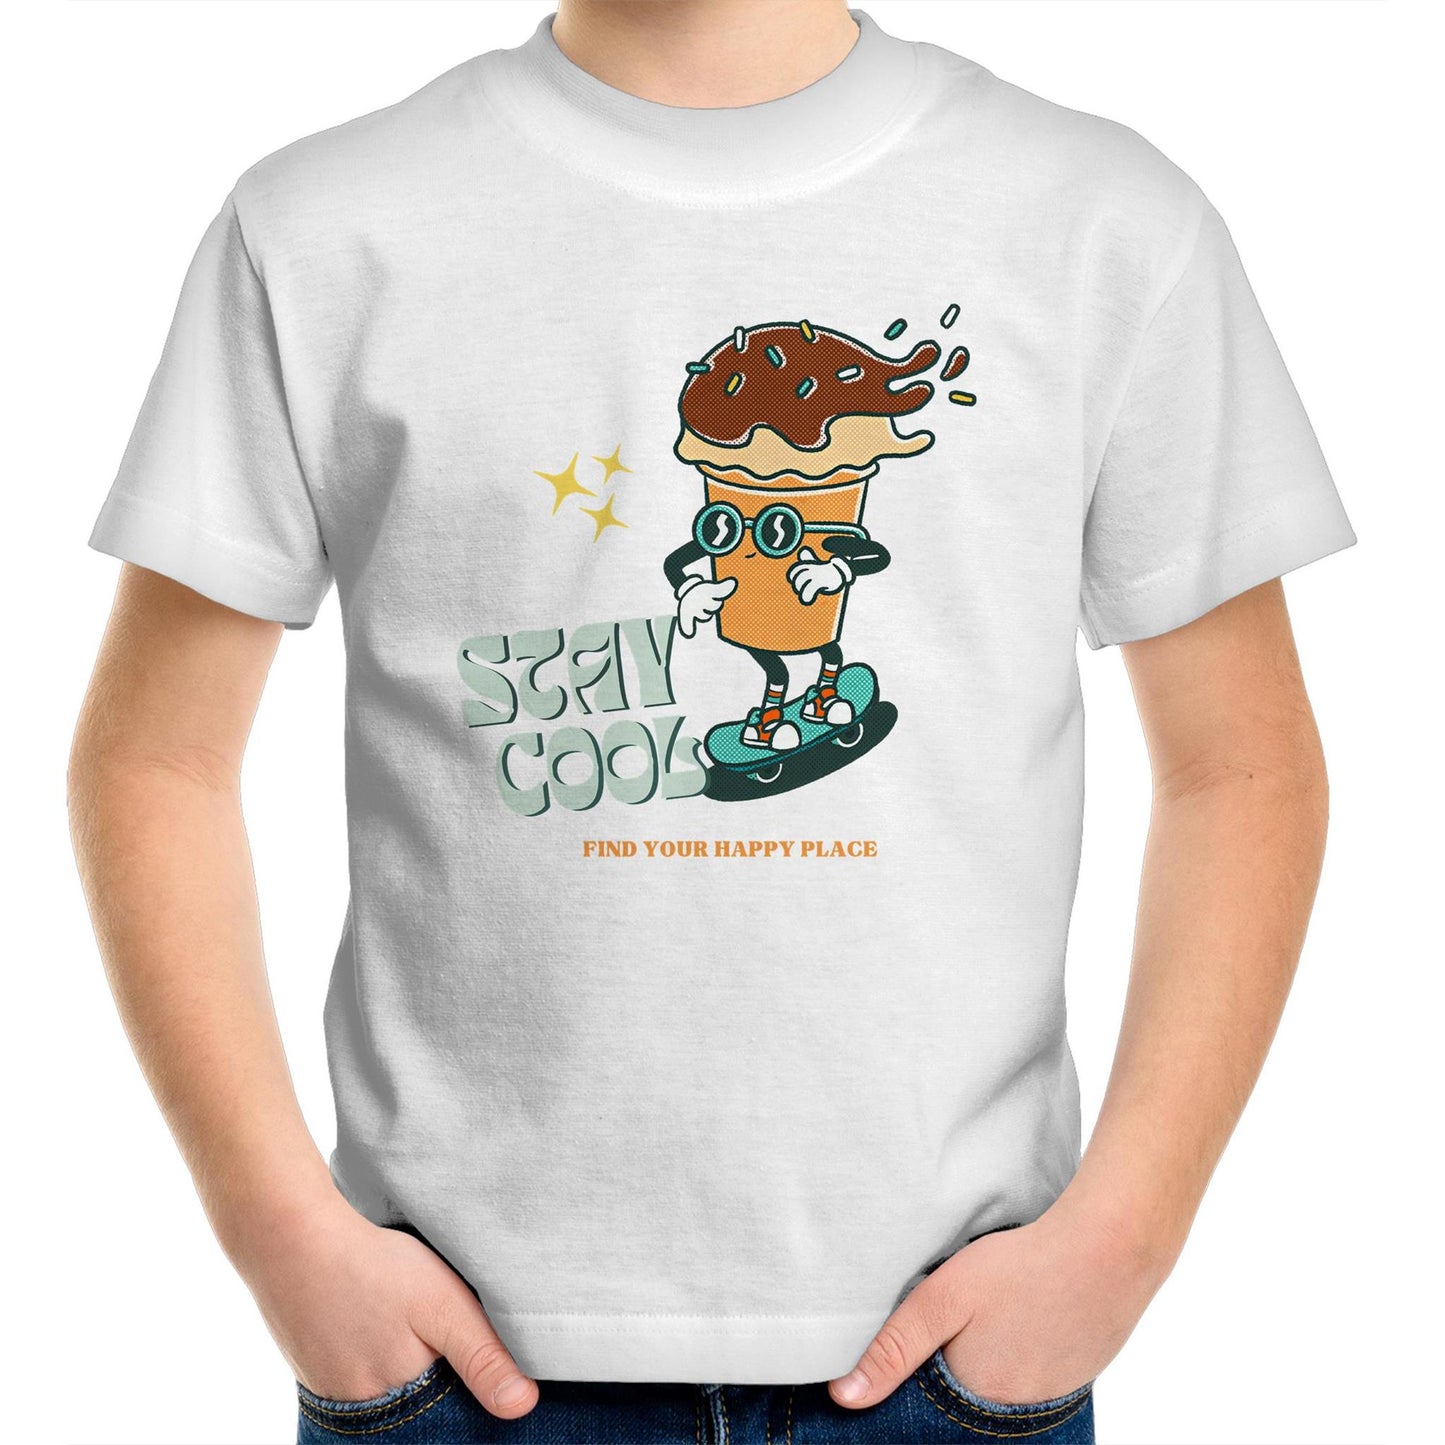 Stay Cool, Find Your Happy Place - Kids Youth Crew T-Shirt White Kids Youth T-shirt Retro Summer